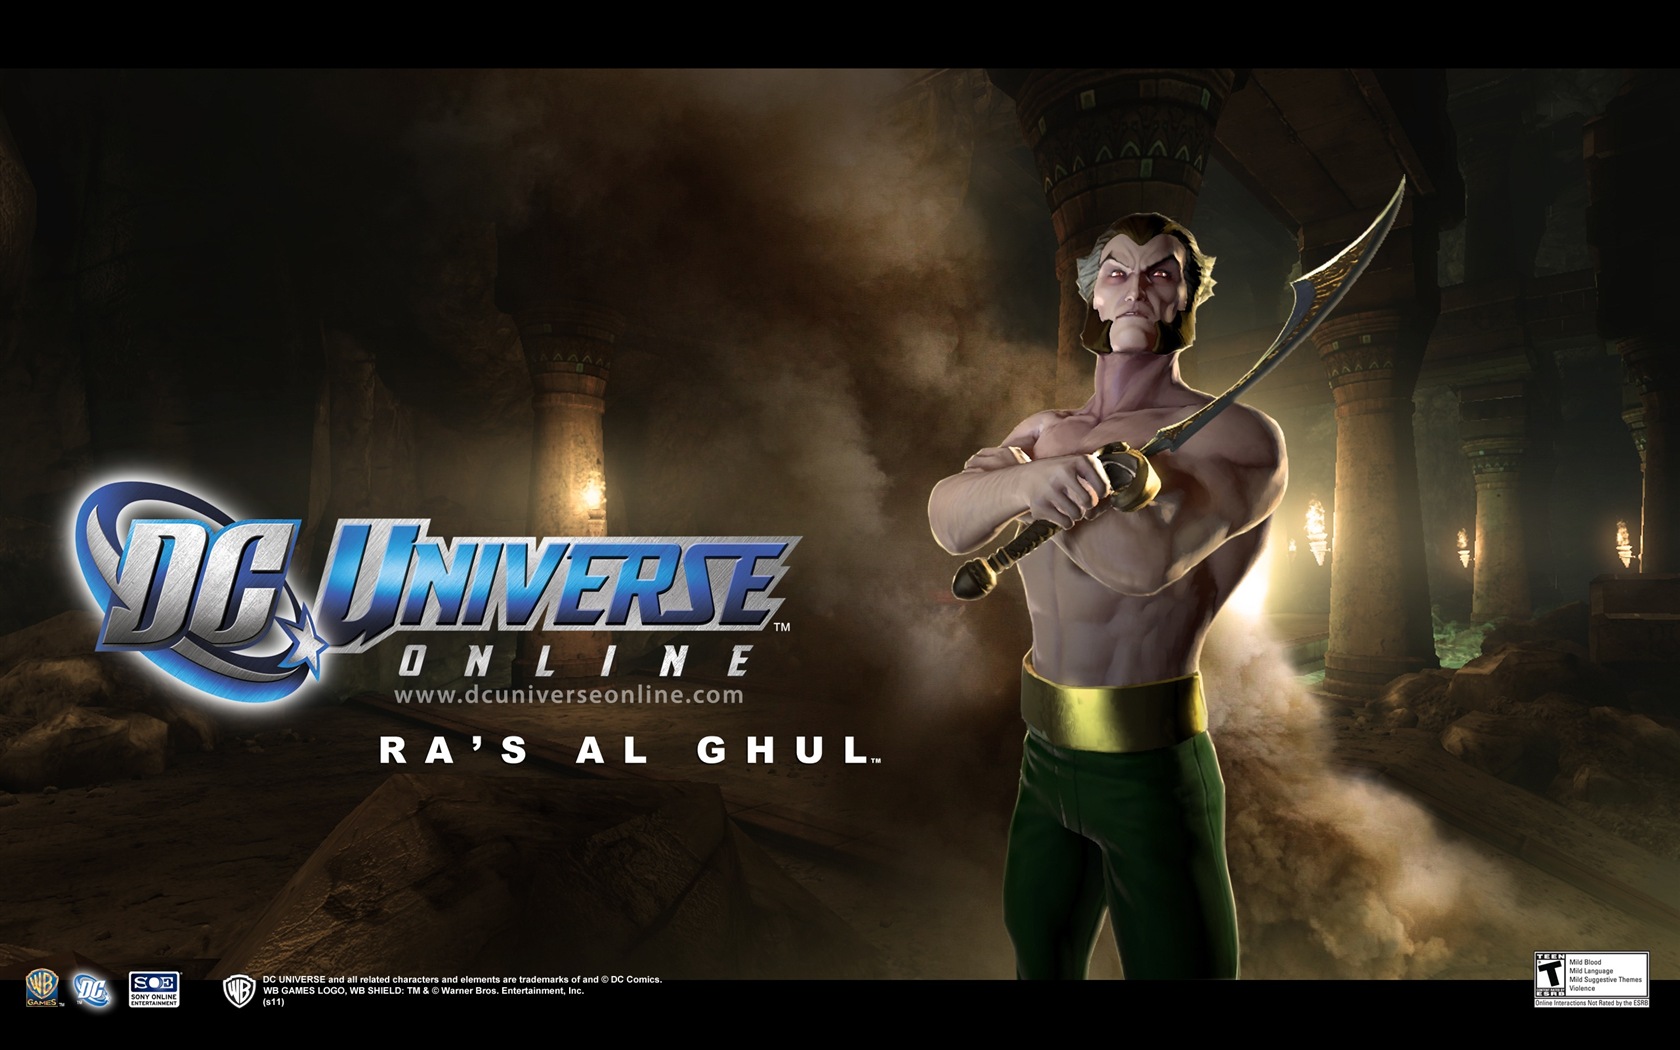 DC Universe Online HD game wallpapers #8 - 1680x1050